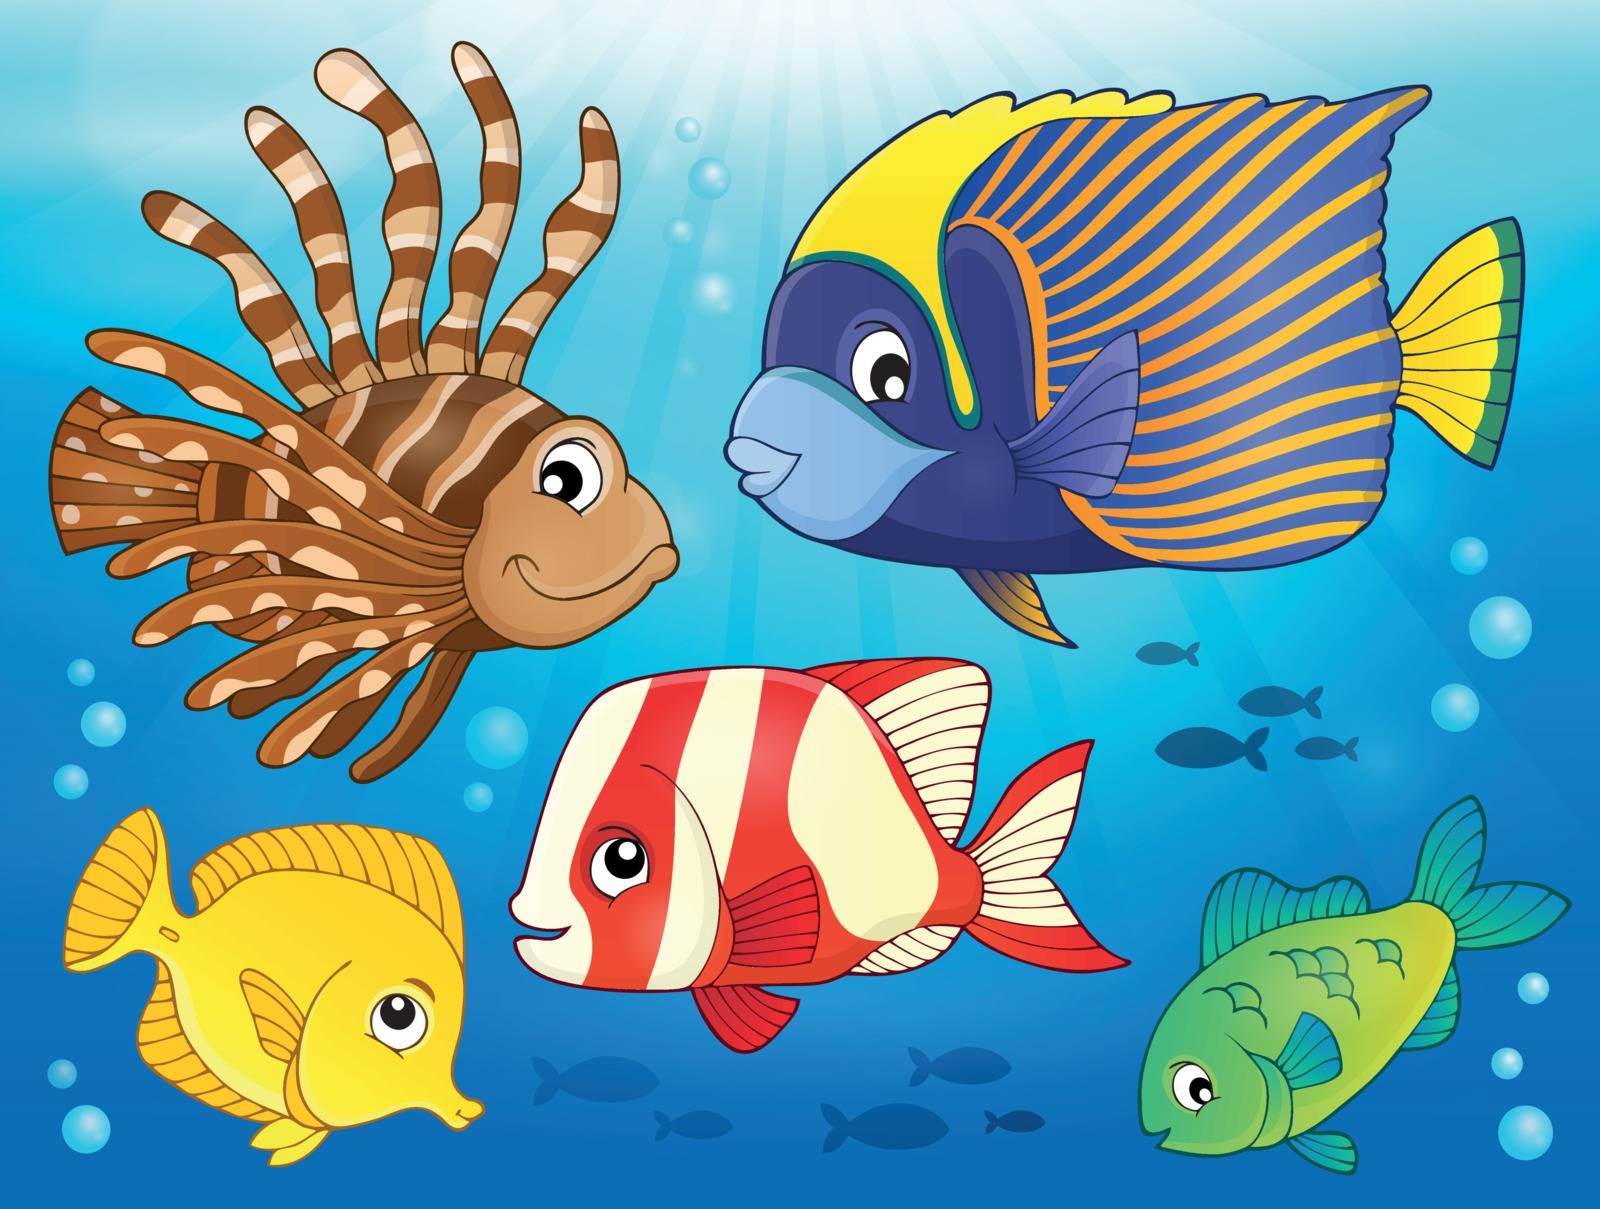 Coral reef fish theme image 3 - eps10 vector illustration.